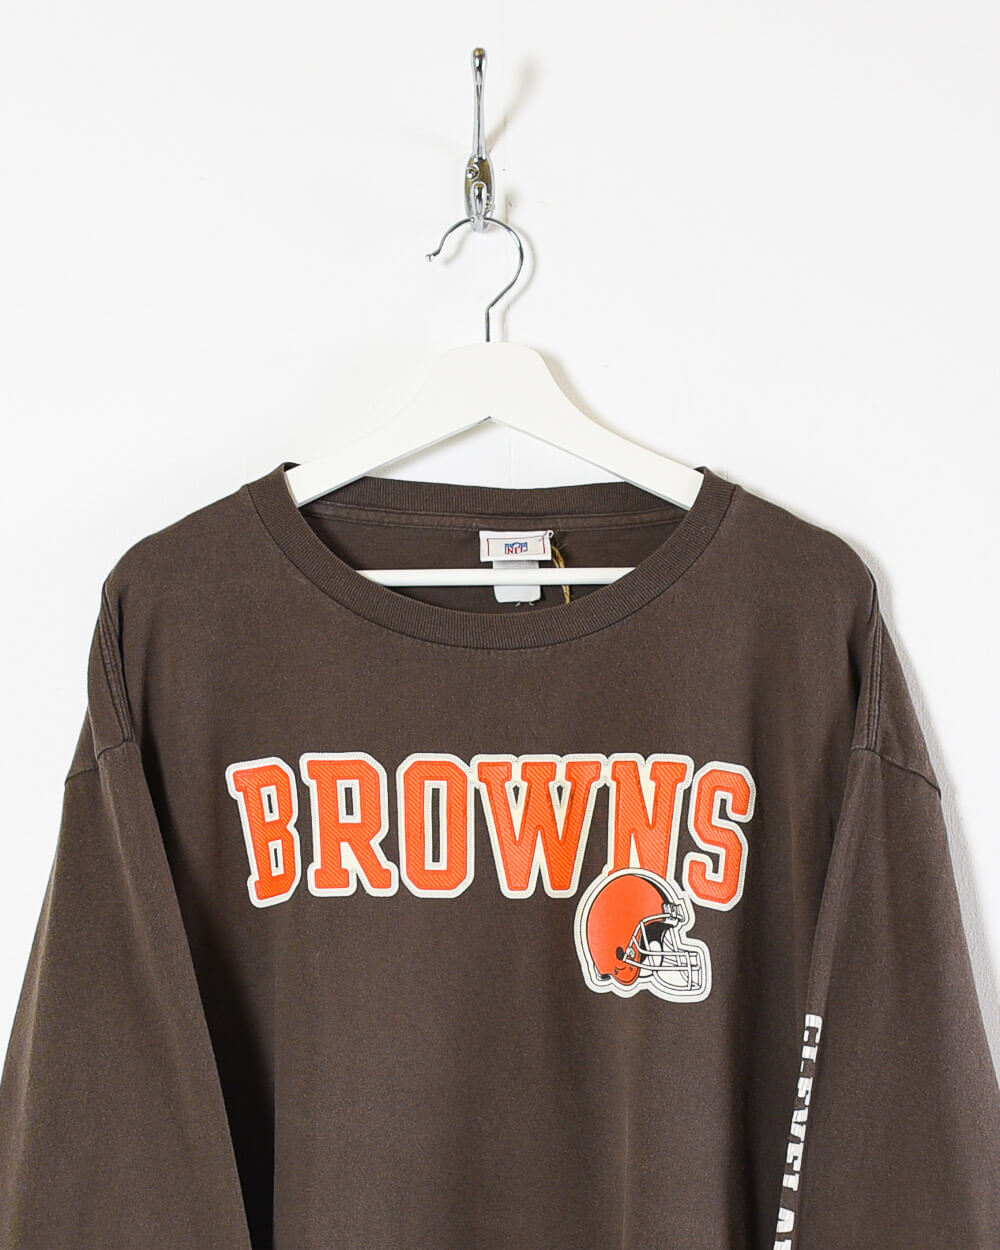 Brown NFL Browns Long Sleeved T-Shirt - X-Large